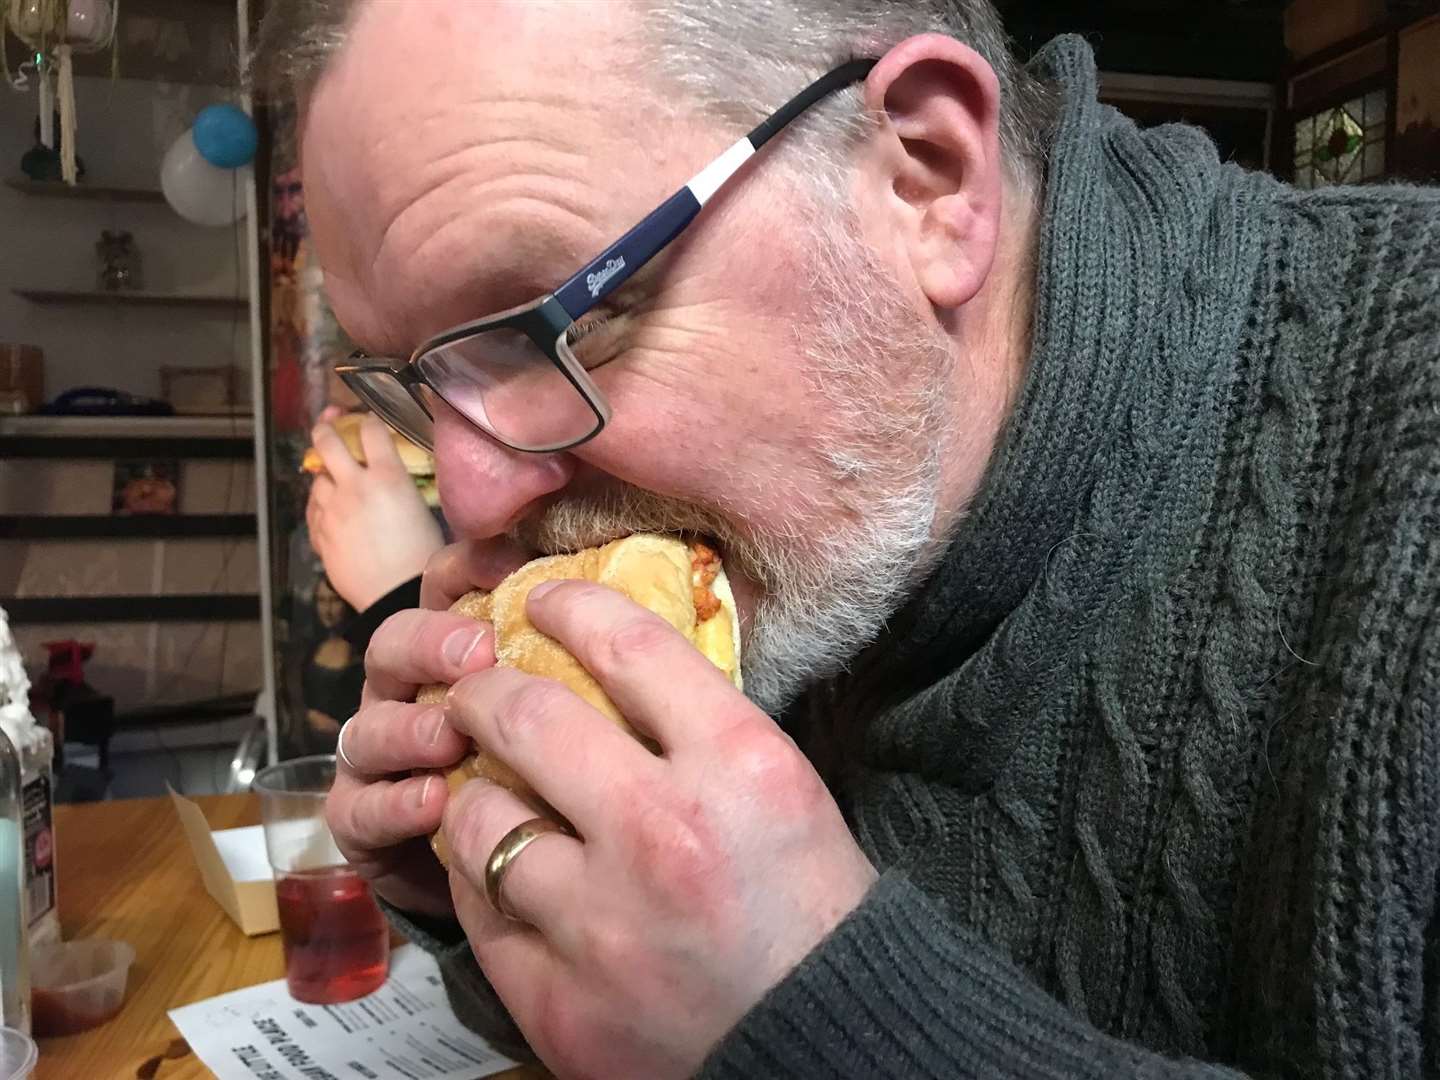 The obligatory picture of your reviewer chomping down on his burger